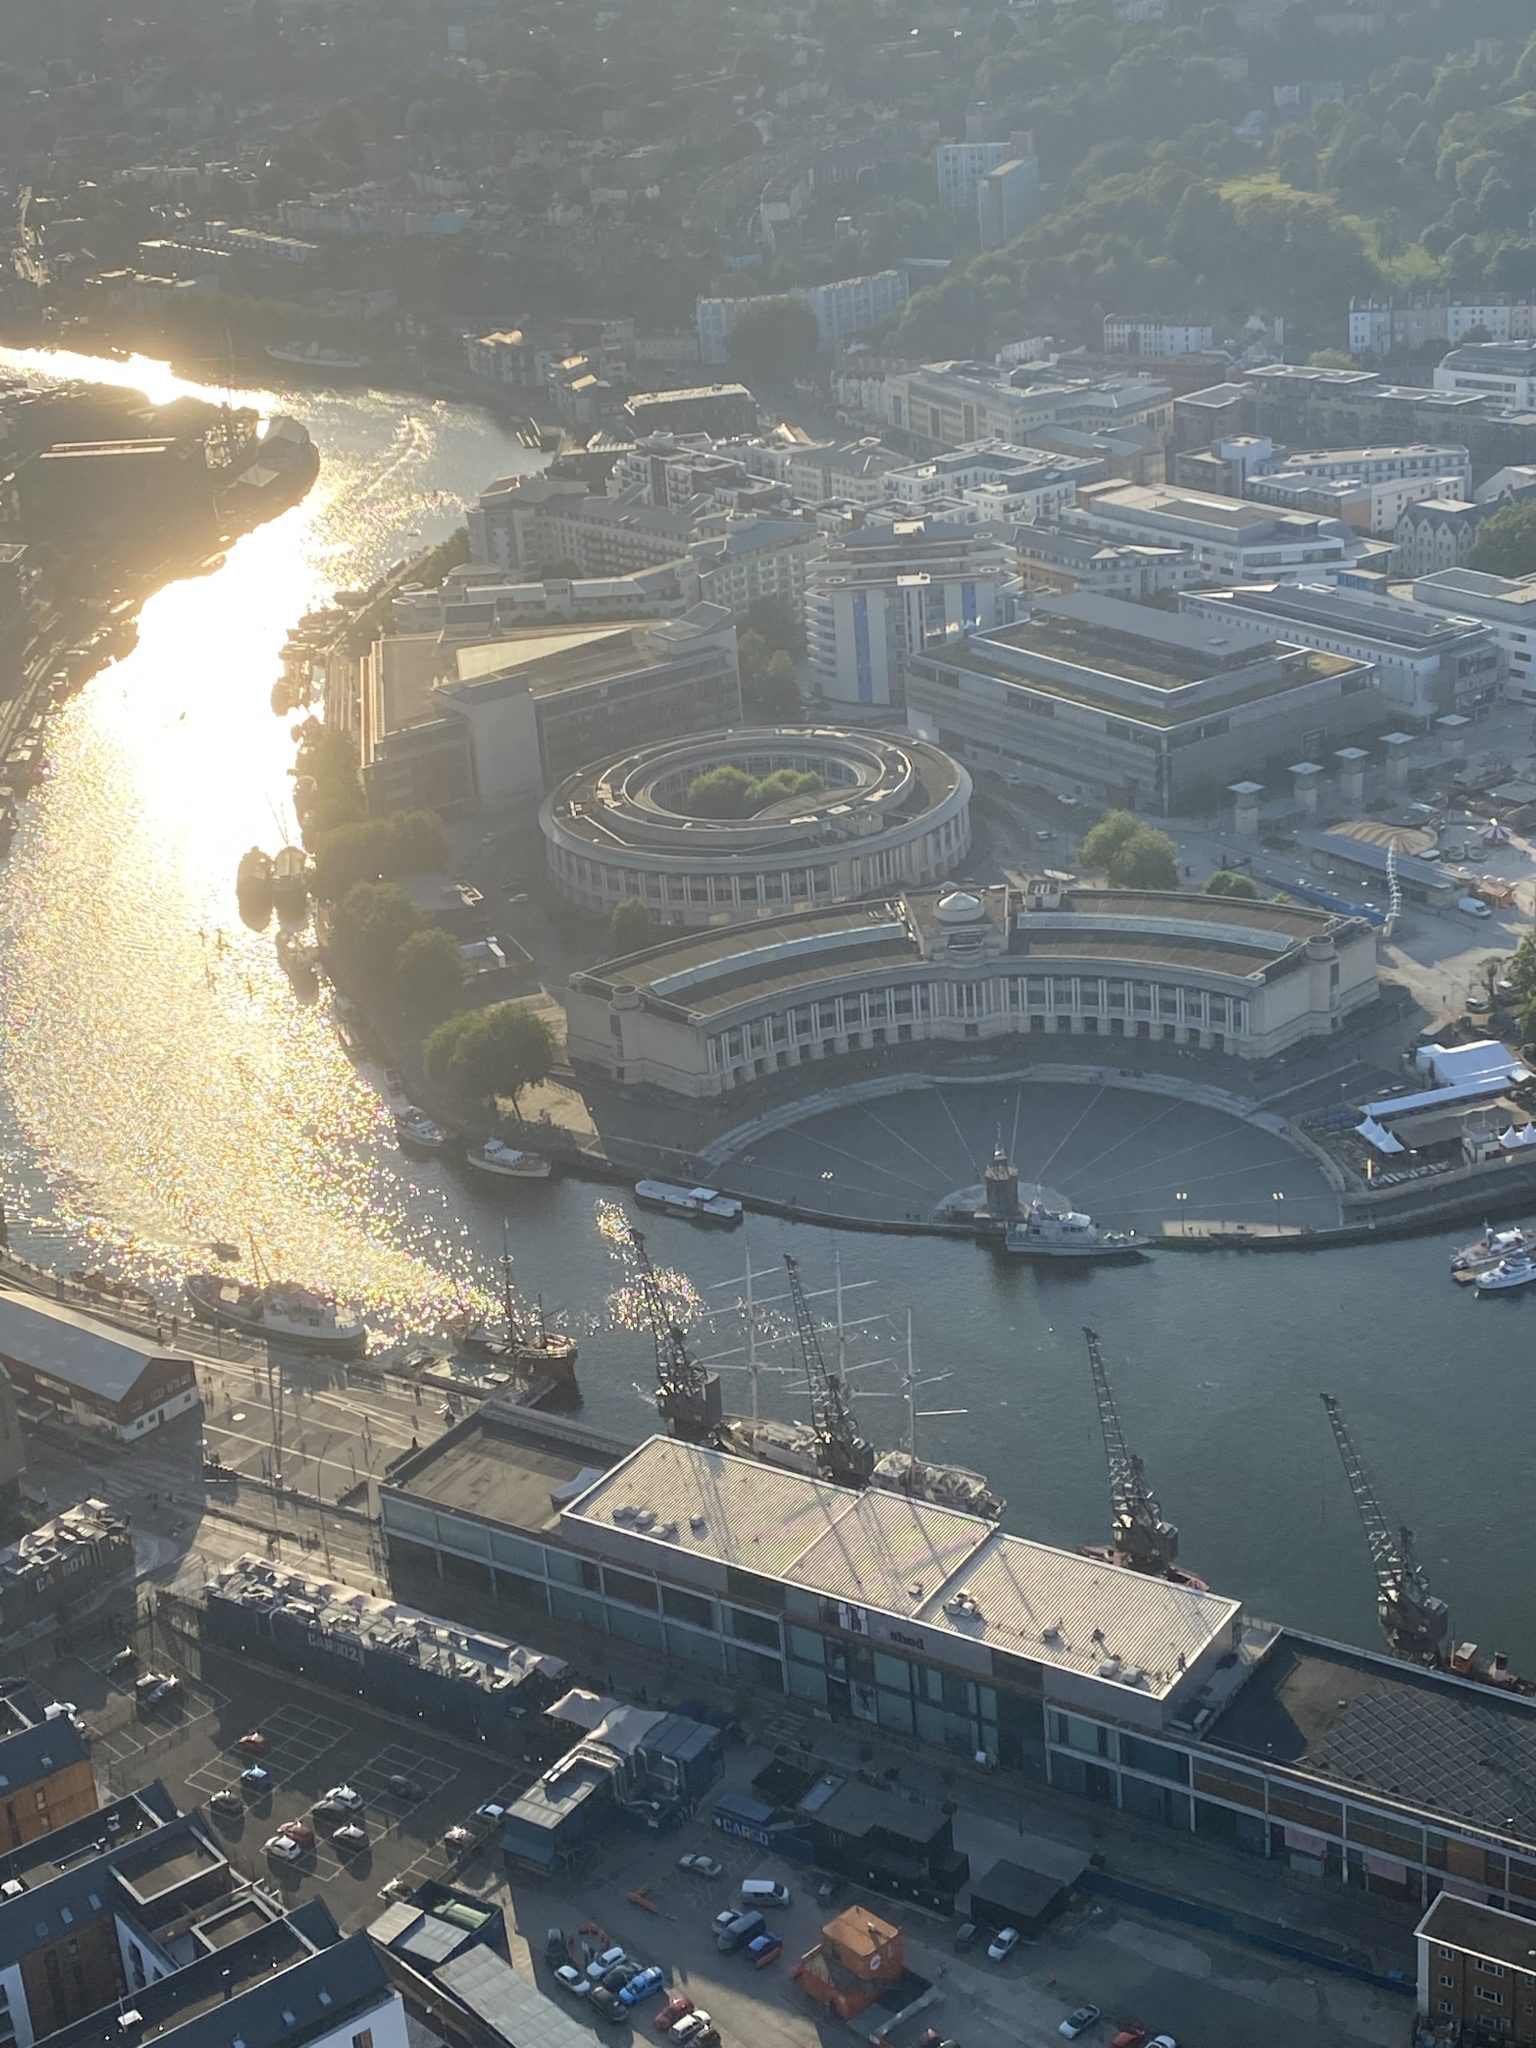 Aerial view of Bristol harbour (taken from a hot air balloon)